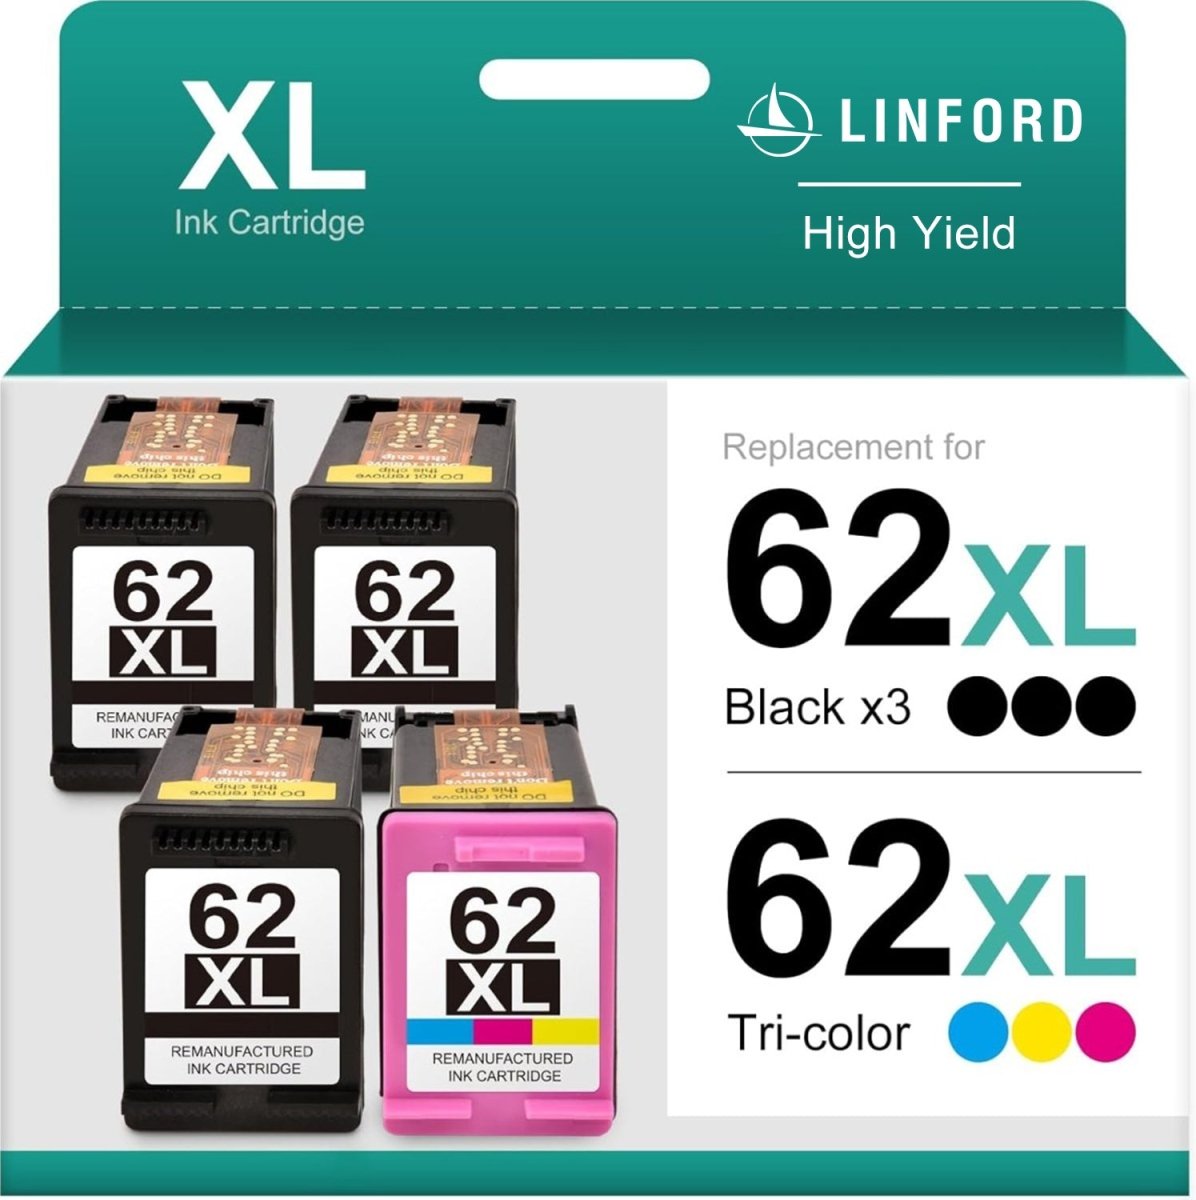 Remanufactured HP 62XL Ink Combo High Yield (3 Black, 1 Tri-Color) - Linford Office:Printer Ink & Toner Cartridge